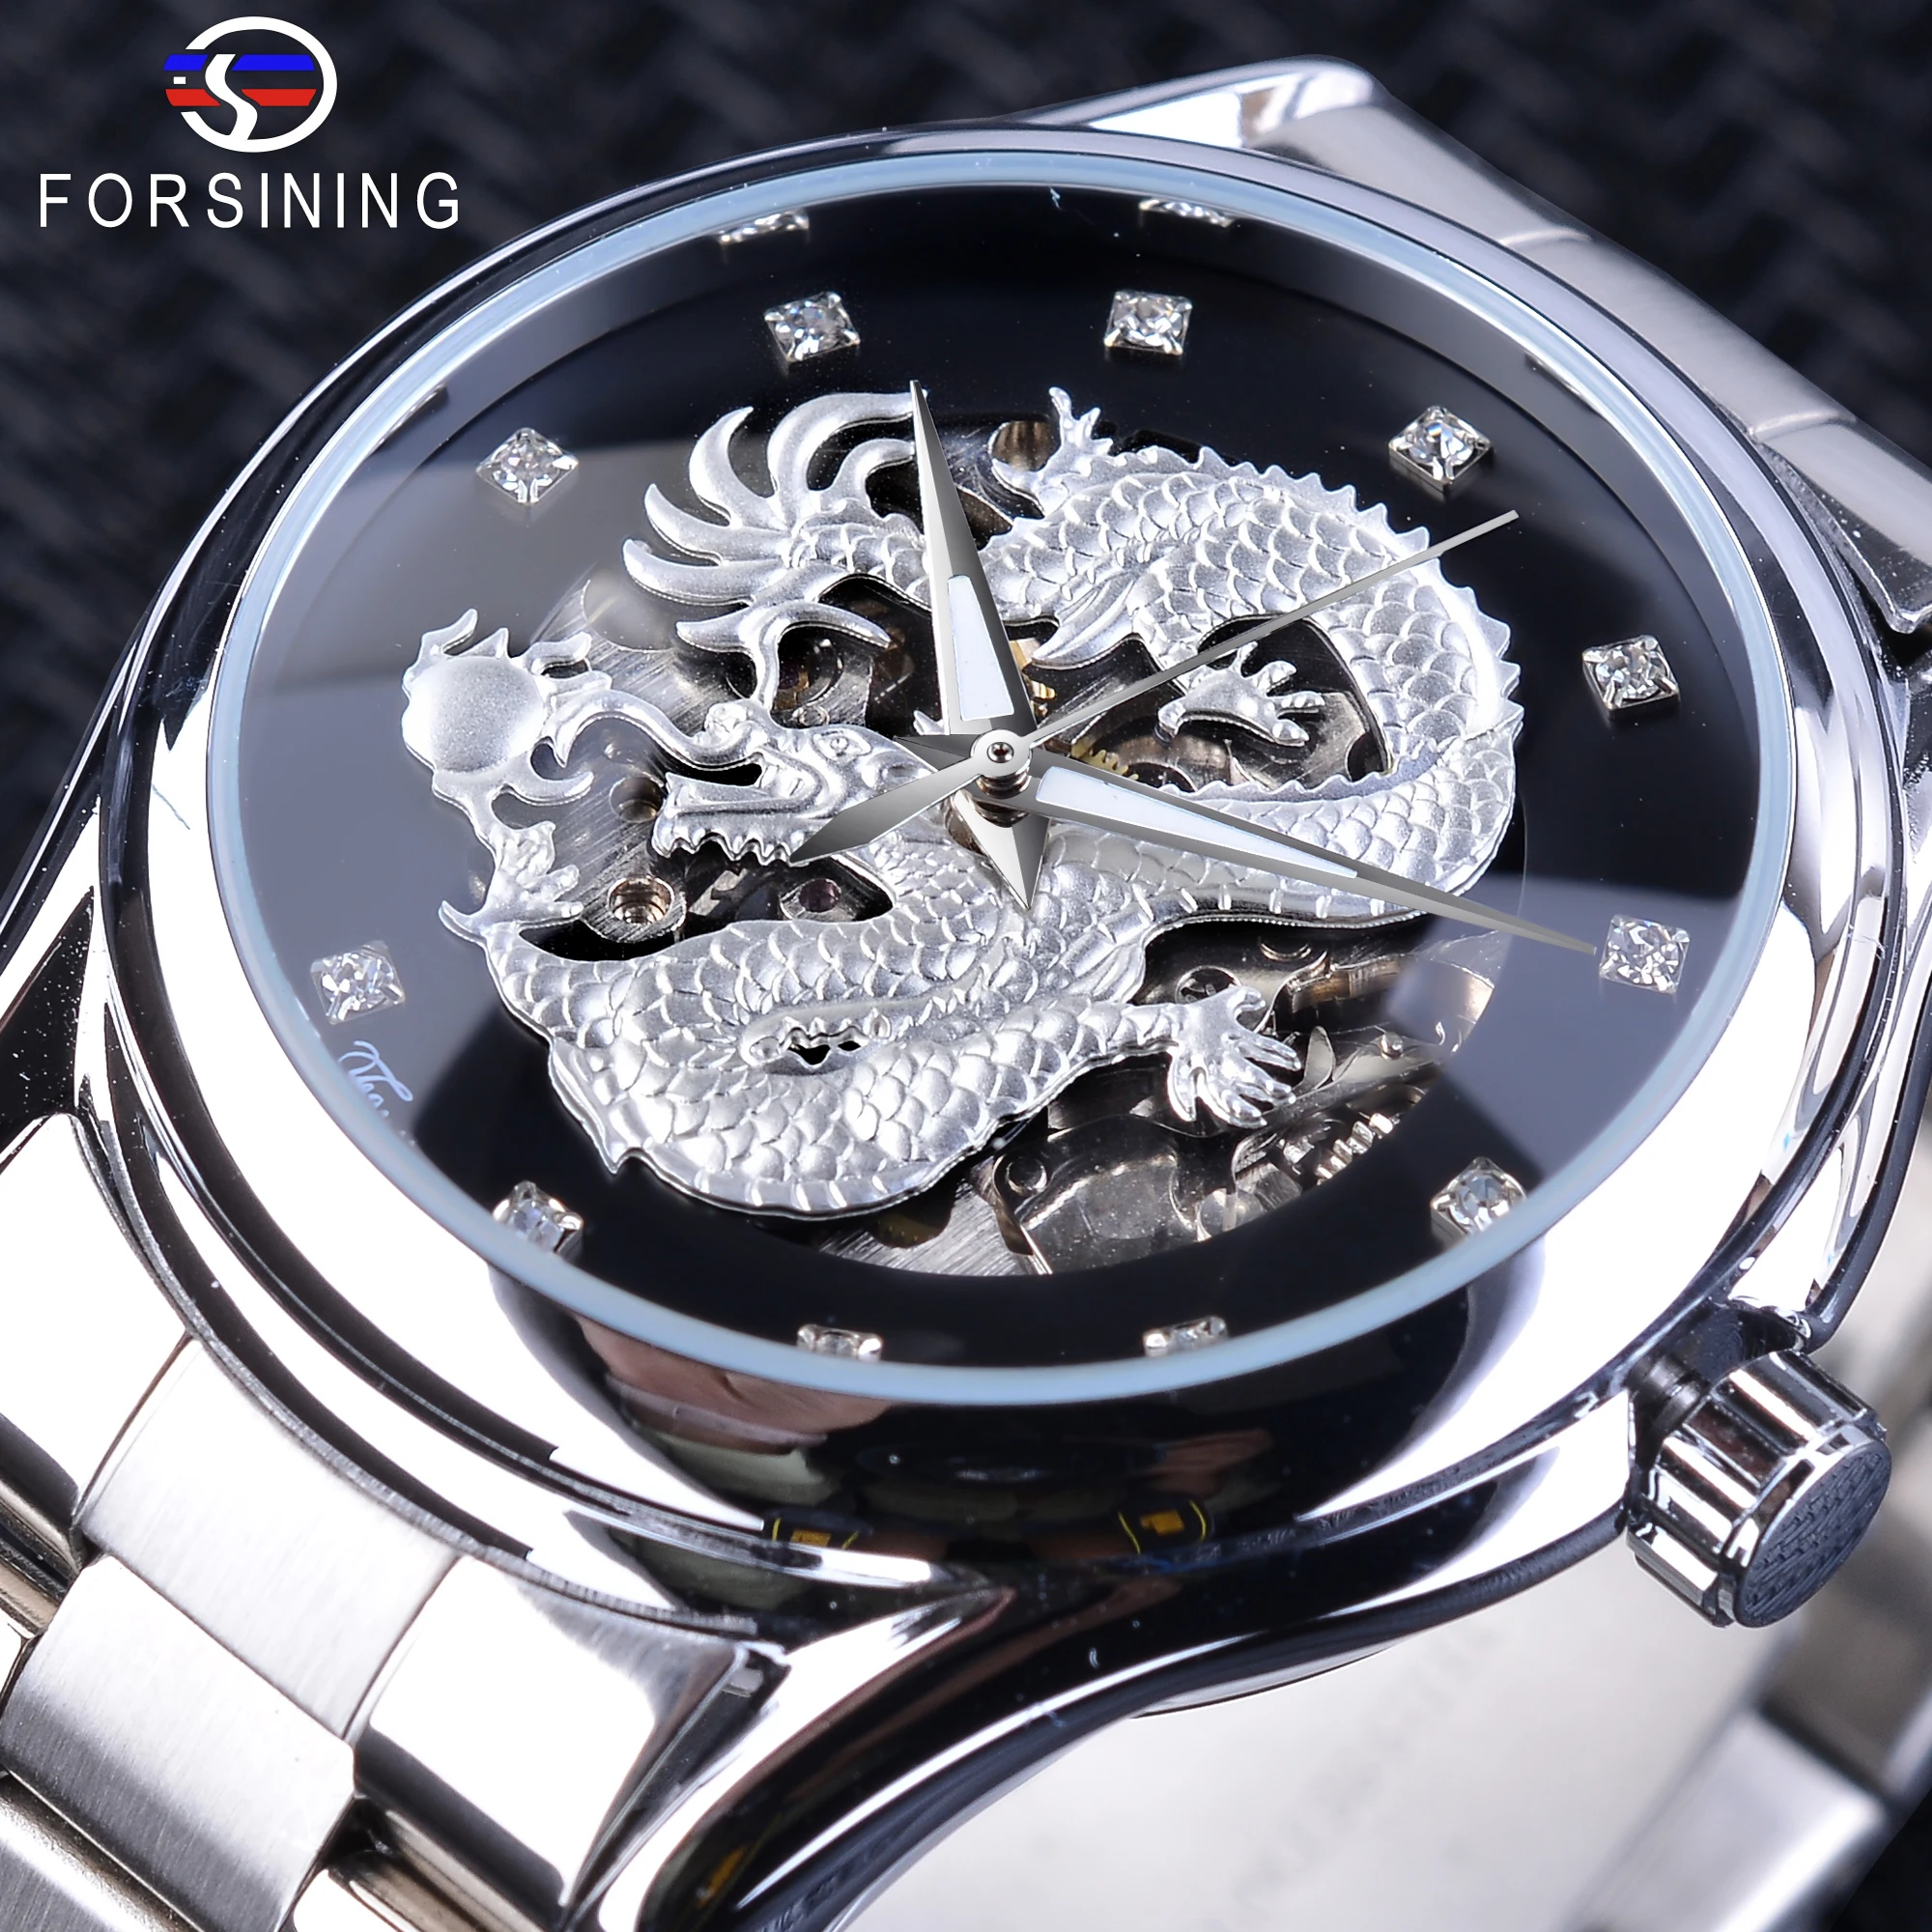 Forsining Fashion Dragon Design Silver Stainless Steel Diamond Display Men's Automatic Wristwatch Top Brand Luxury Montre Homme